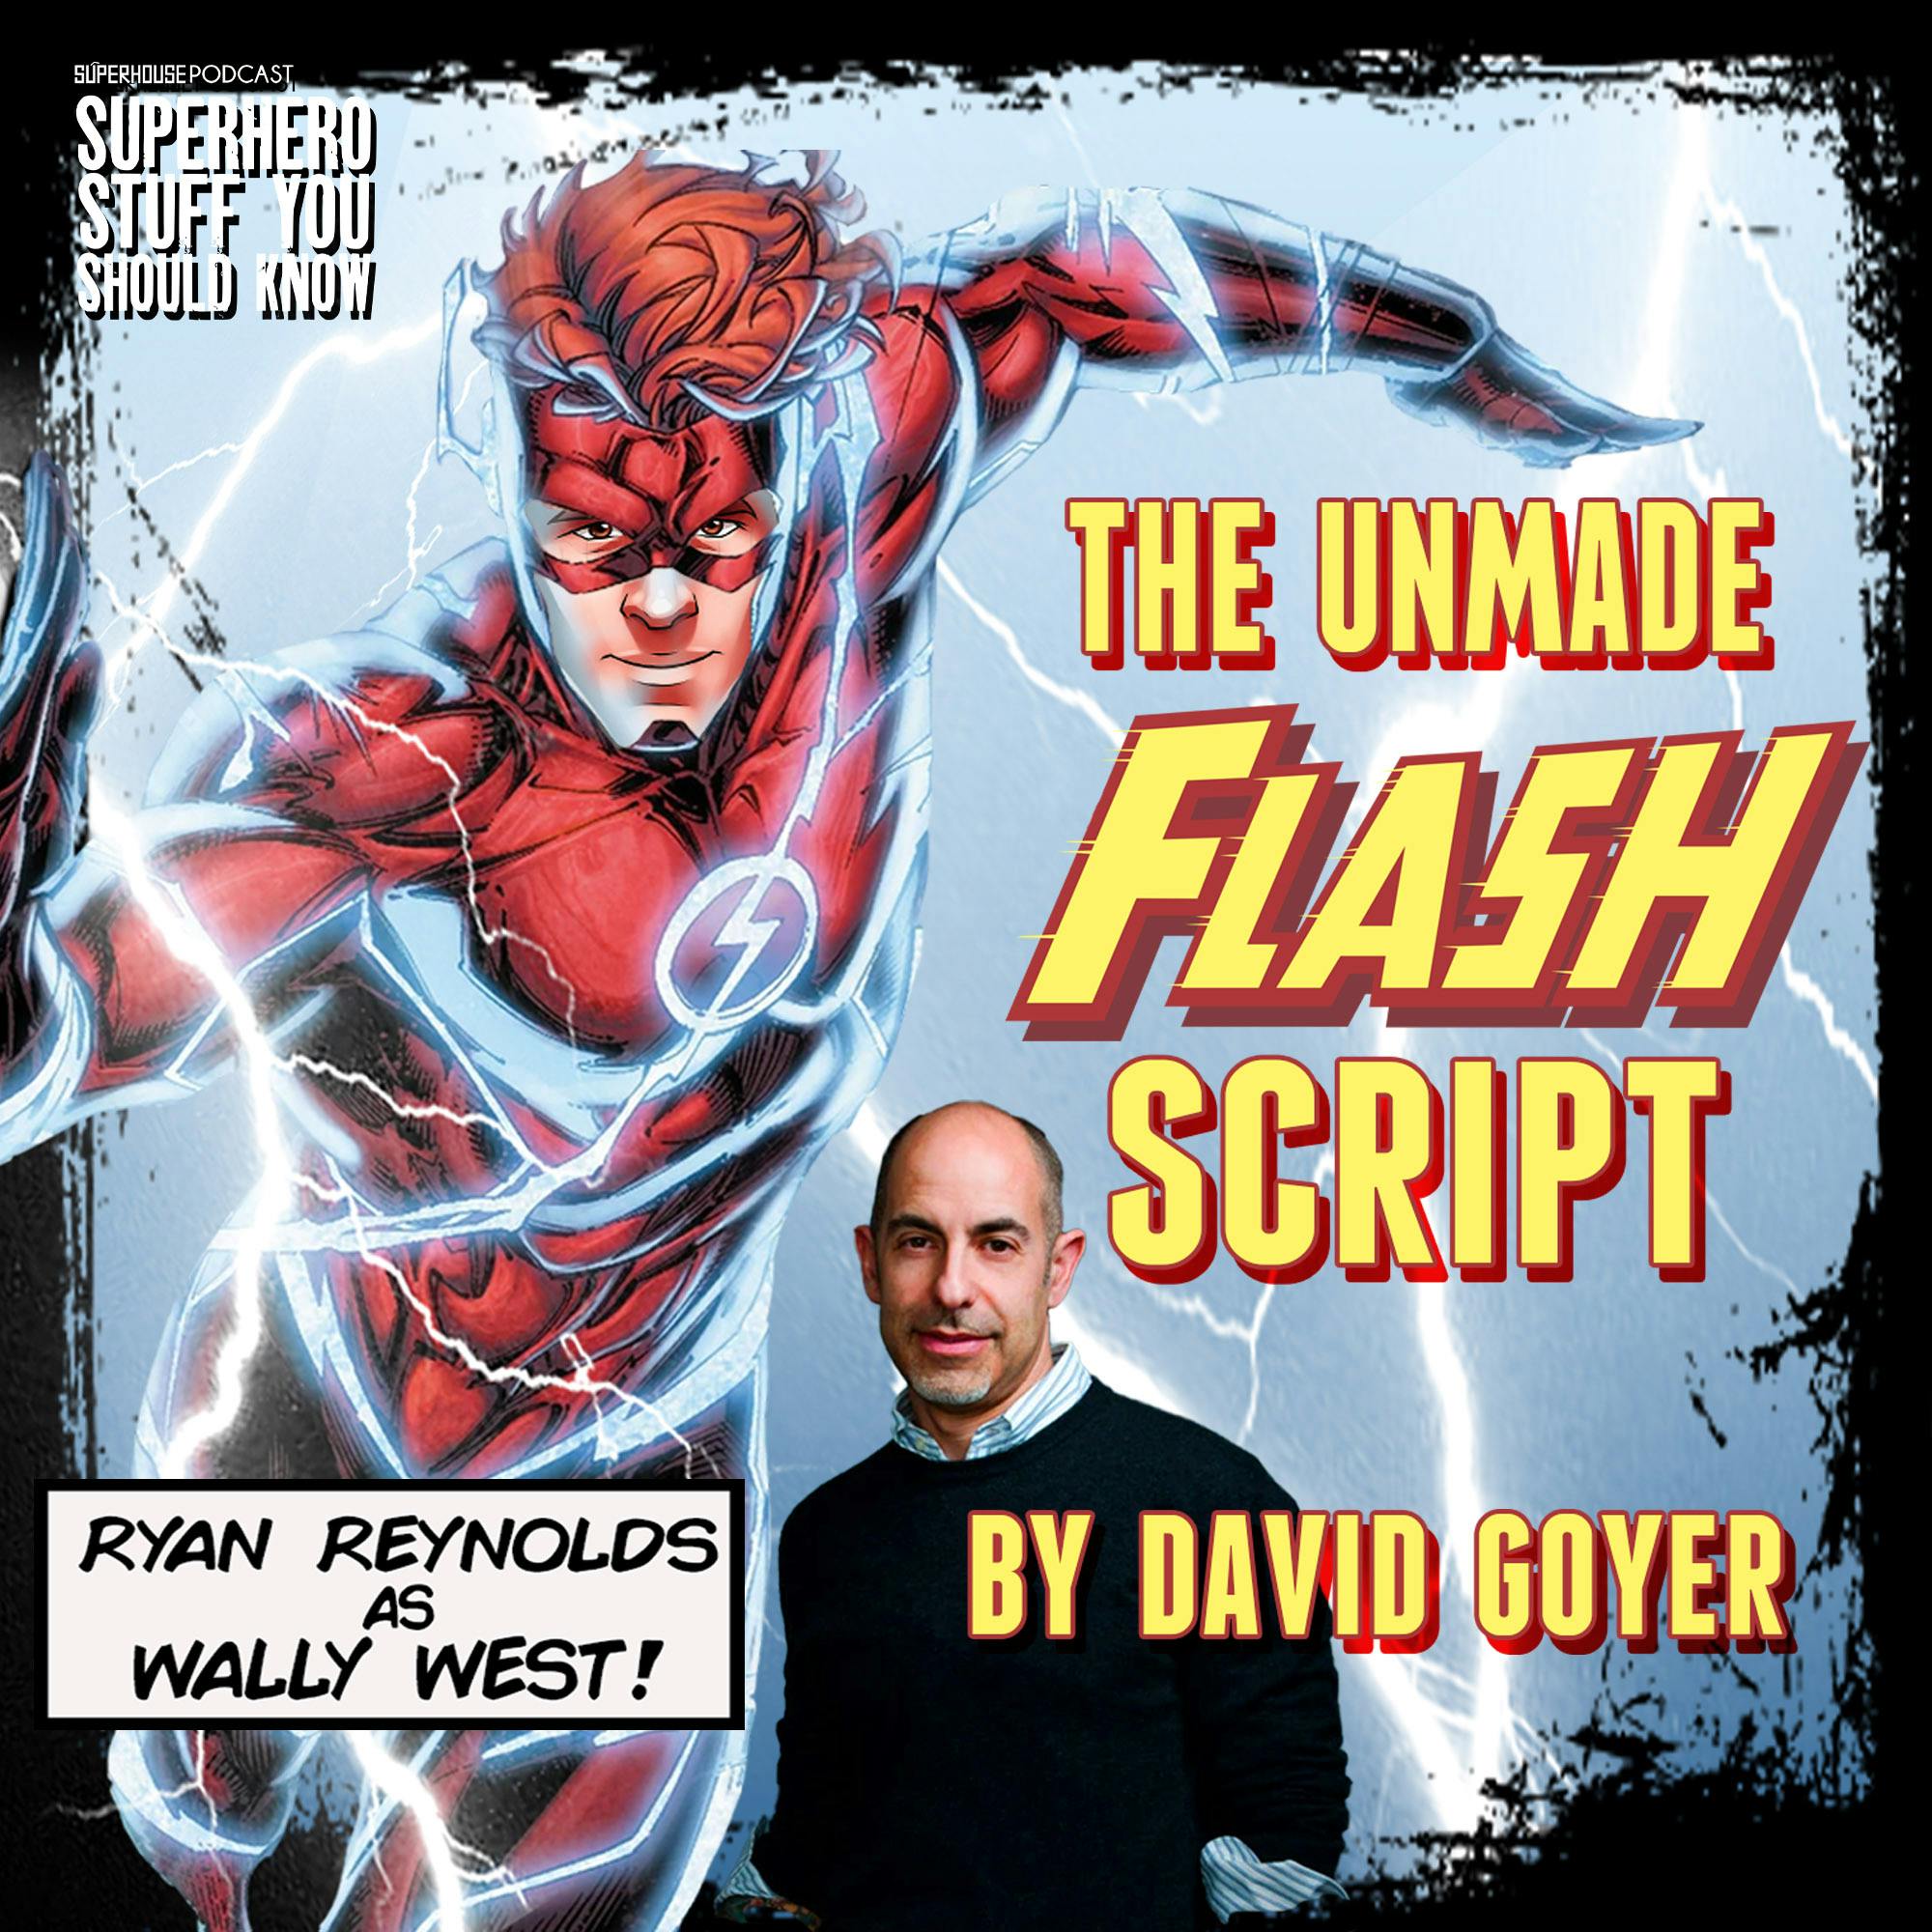 The Unmade Flash Script by David Goyer with Ryan Reynolds as Wally West!